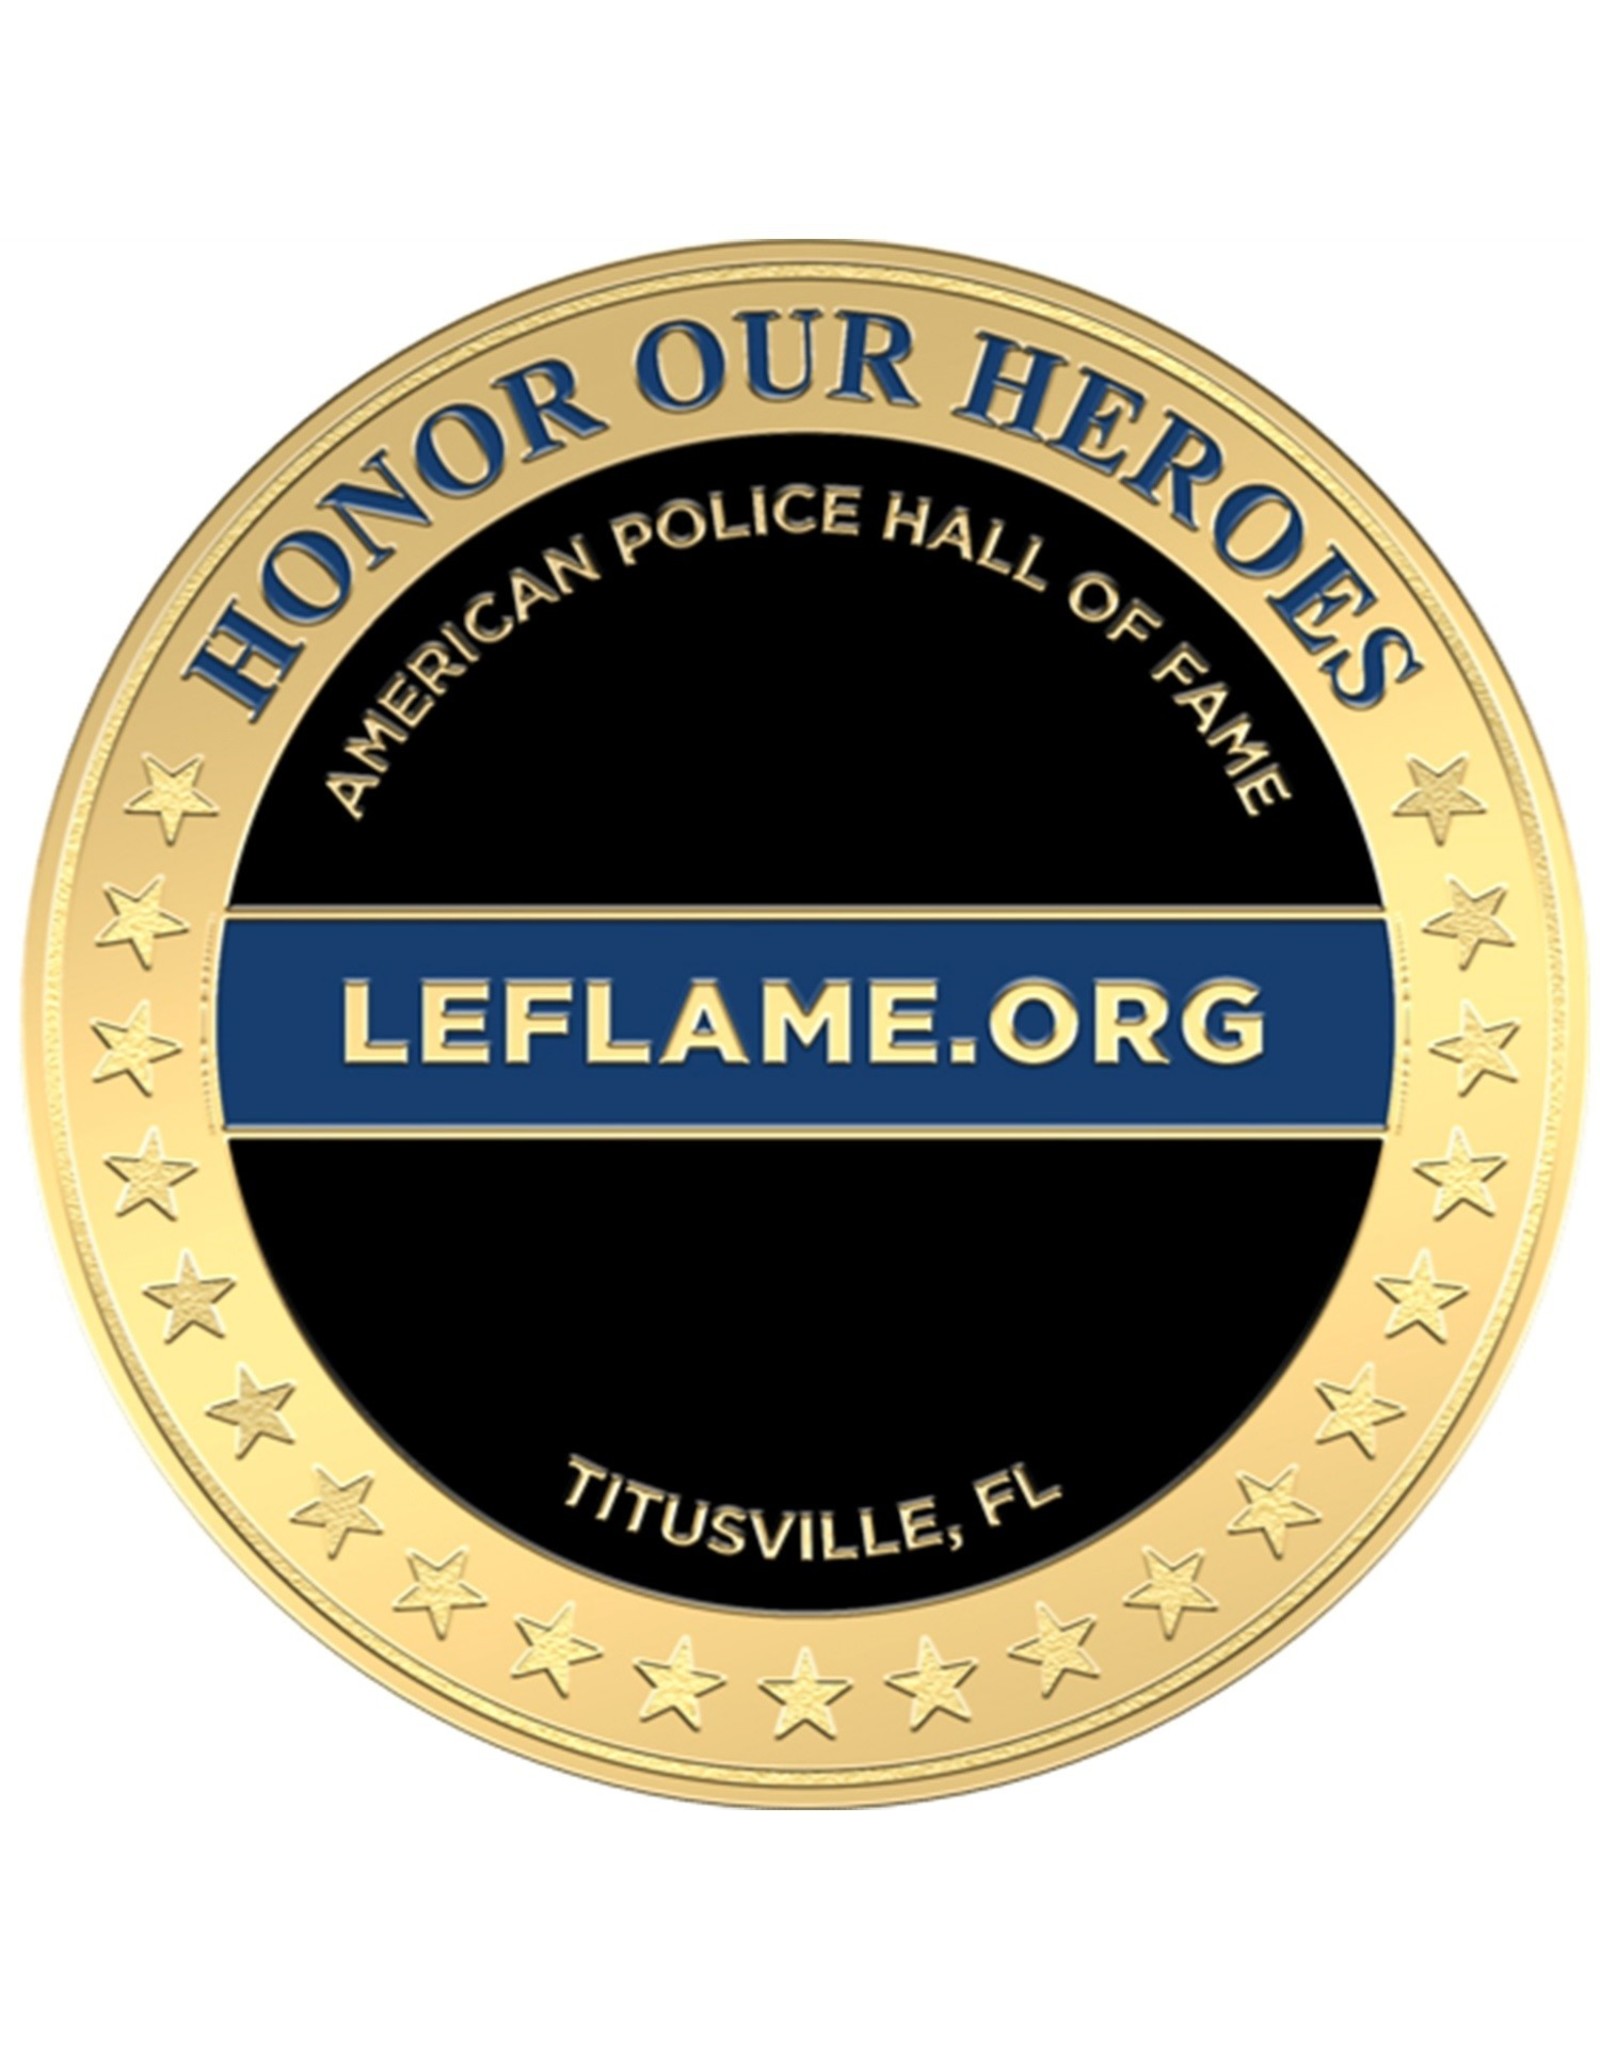 LE Eternal Flame Challenge Coin